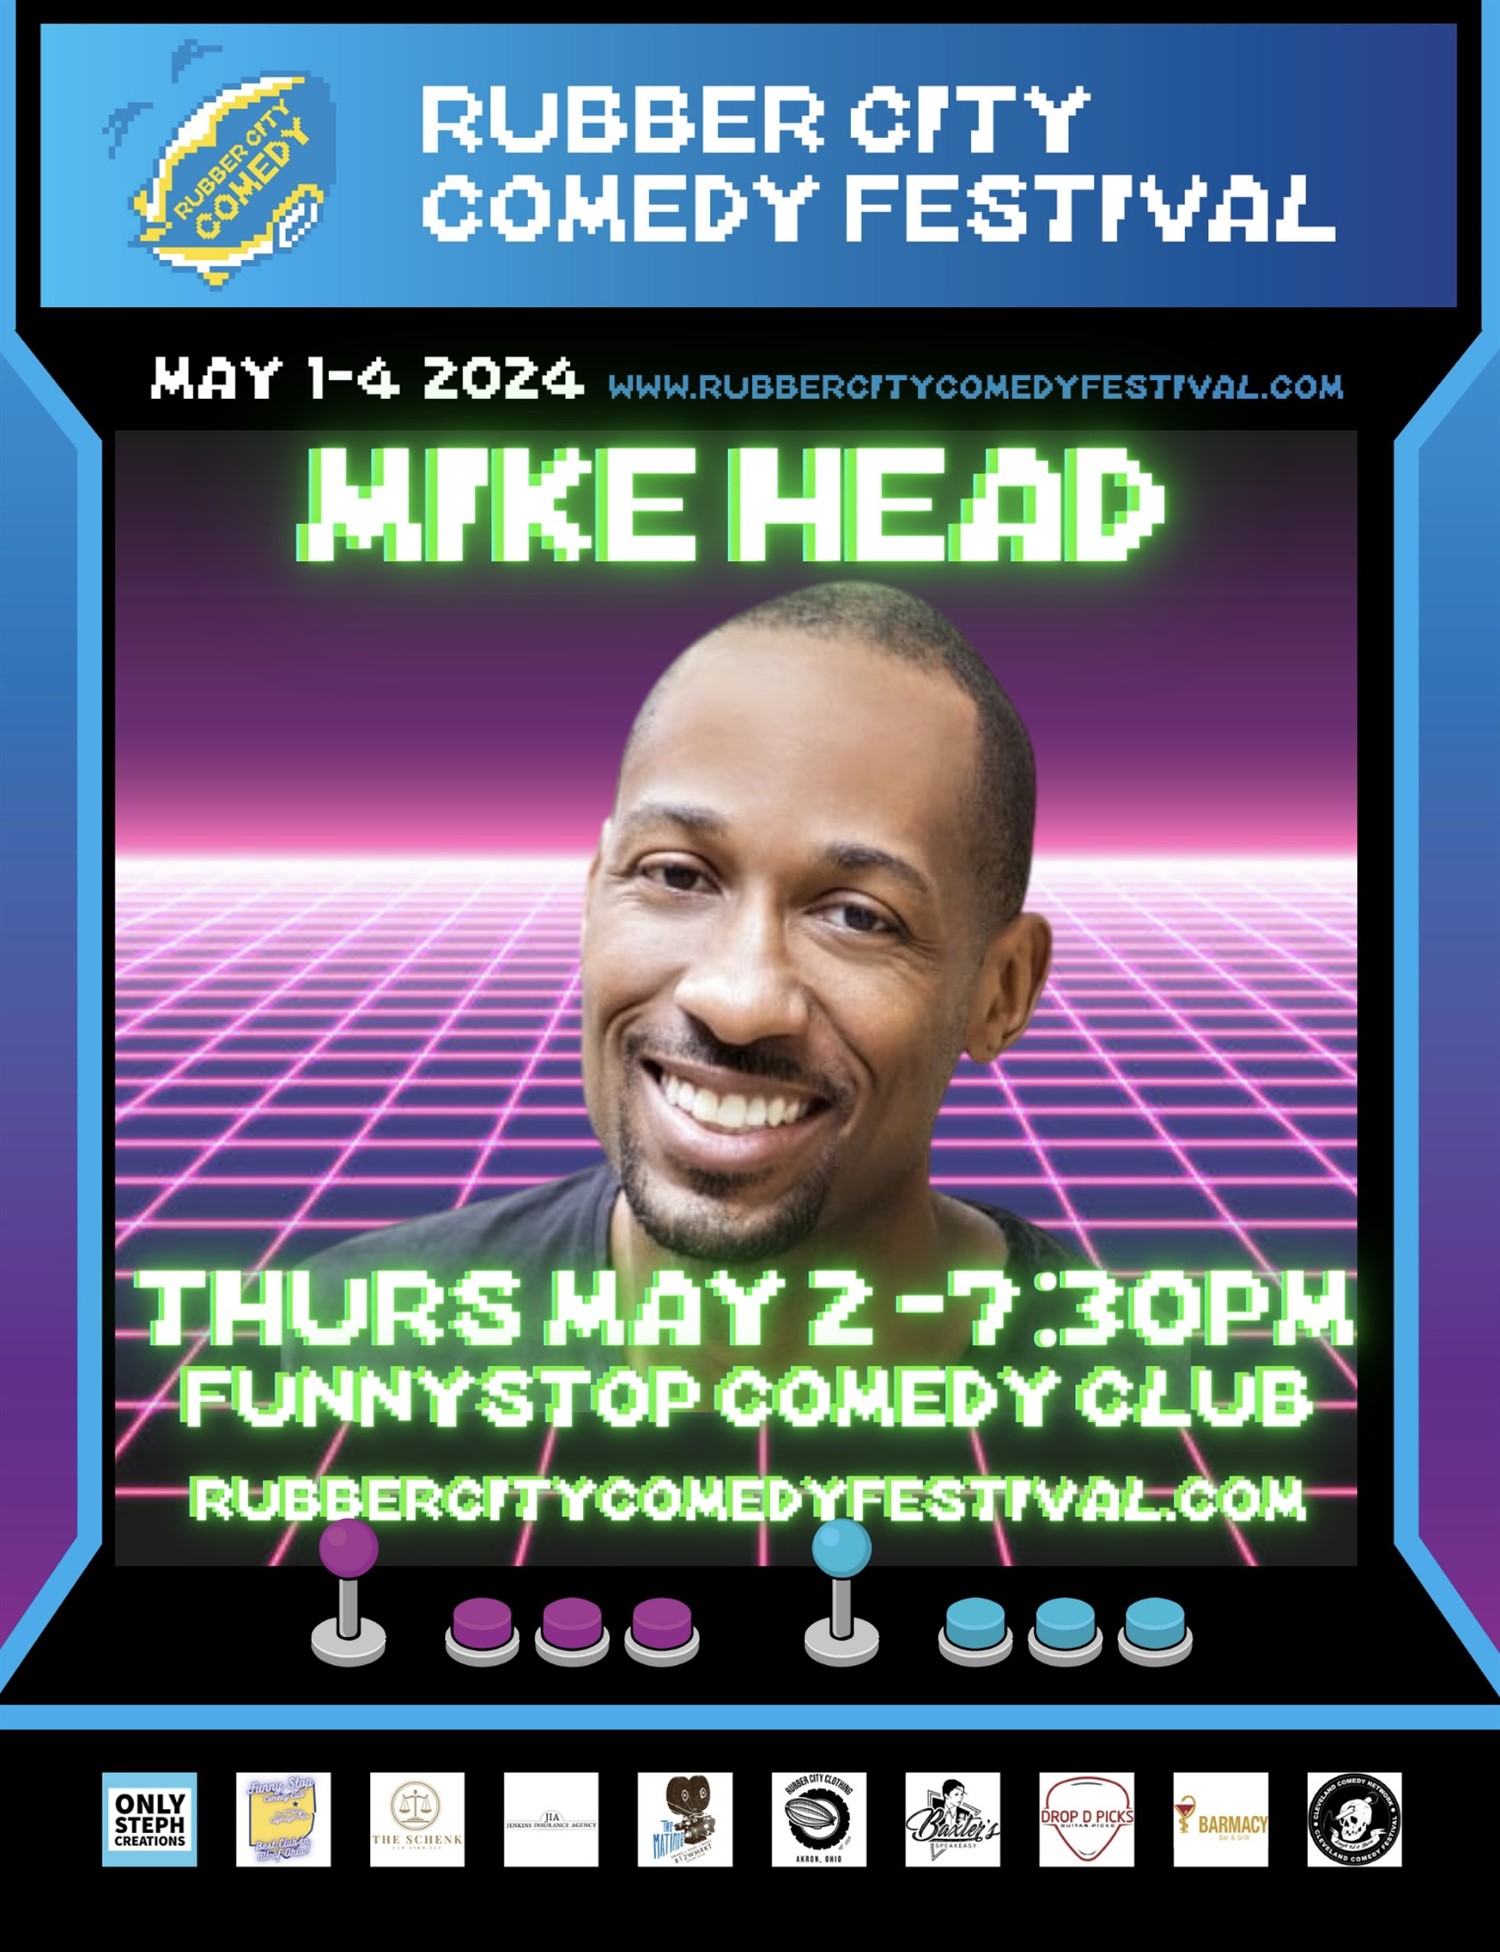 Mike Head Headlines for Rubber City Comedy Festival Funny Stop Comedy Club on mai 02, 19:30@Funny Stop Comedy Club - Achetez des billets et obtenez des informations surFunny Stop funnystop.online